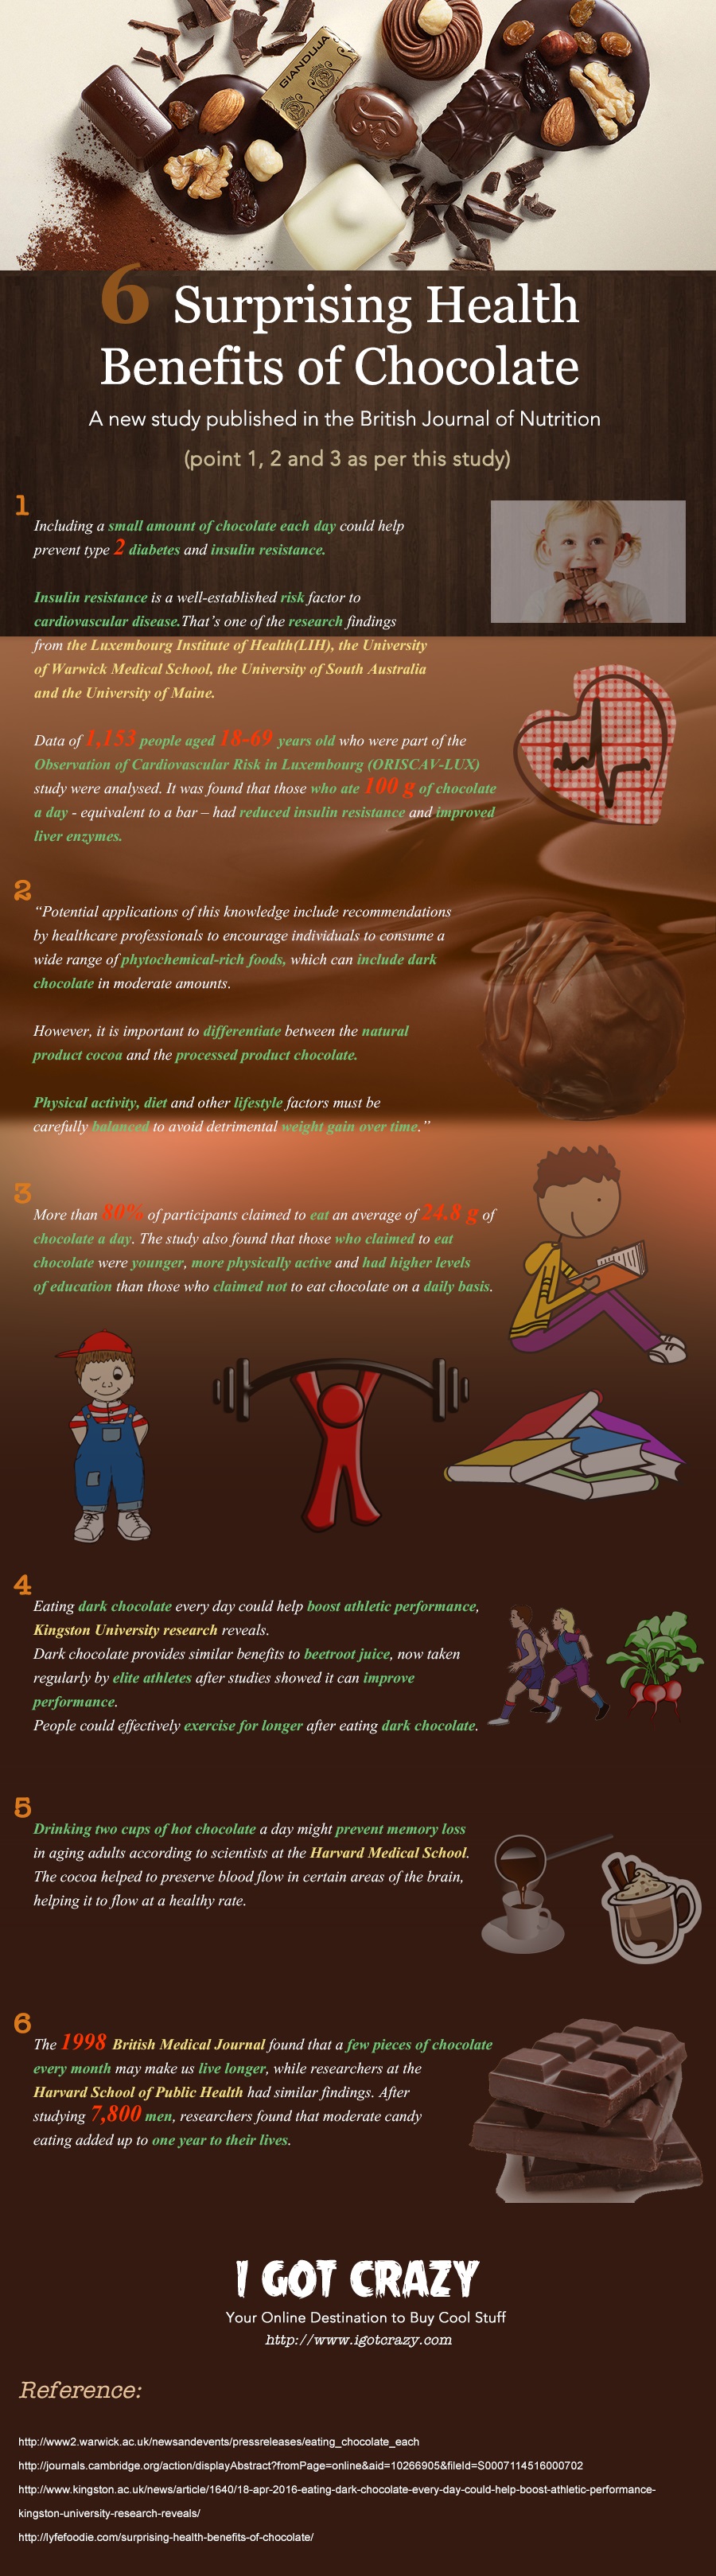 6-Surprising-Health-Benefits-of-Eating-Chocolate-An-Infographic